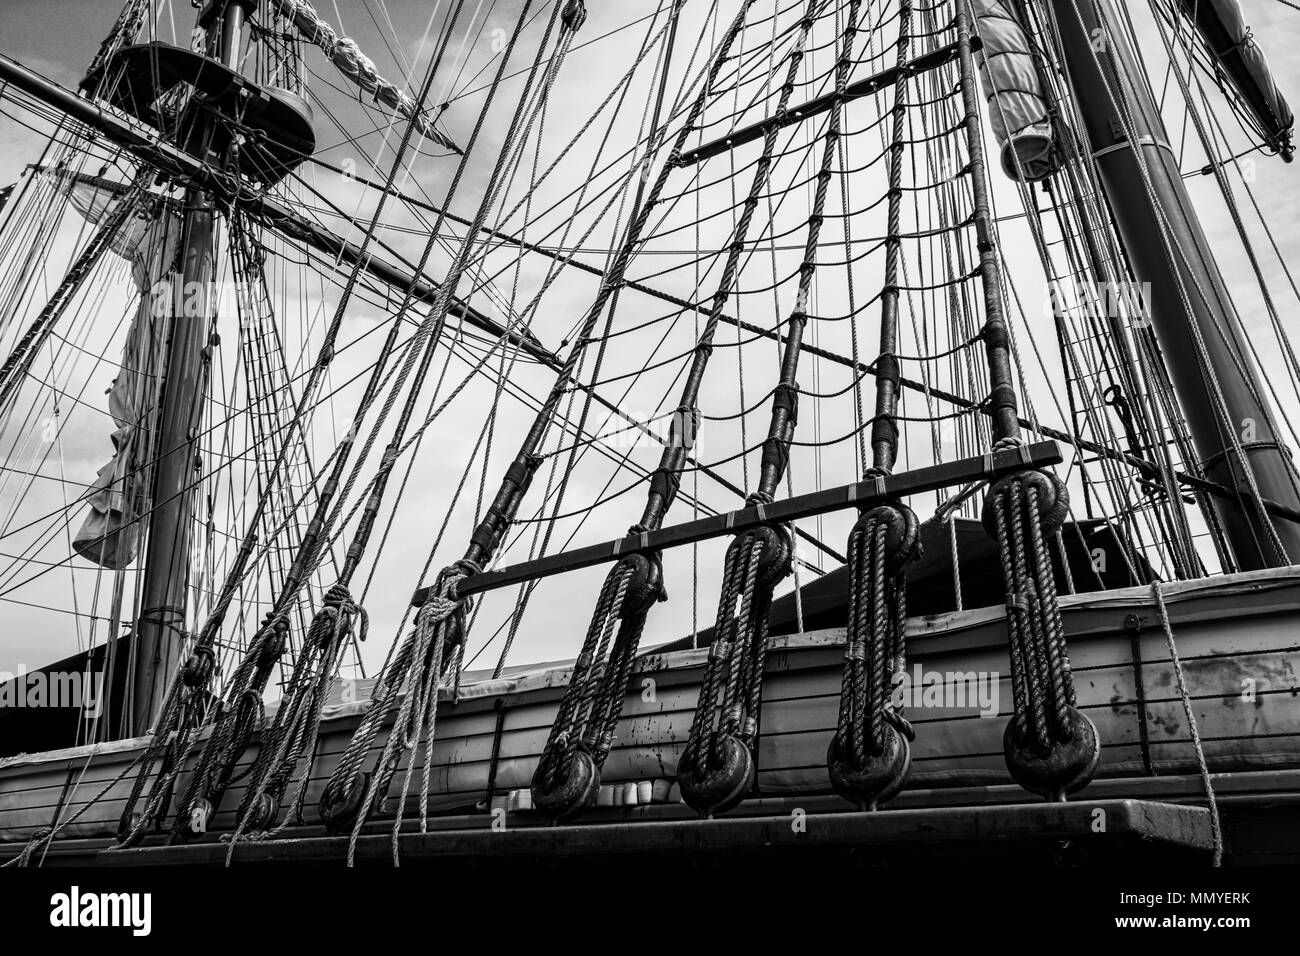 Black and white photo of the masts and rigging of the tall ship U.S. Brig Niagara. Stock Photo